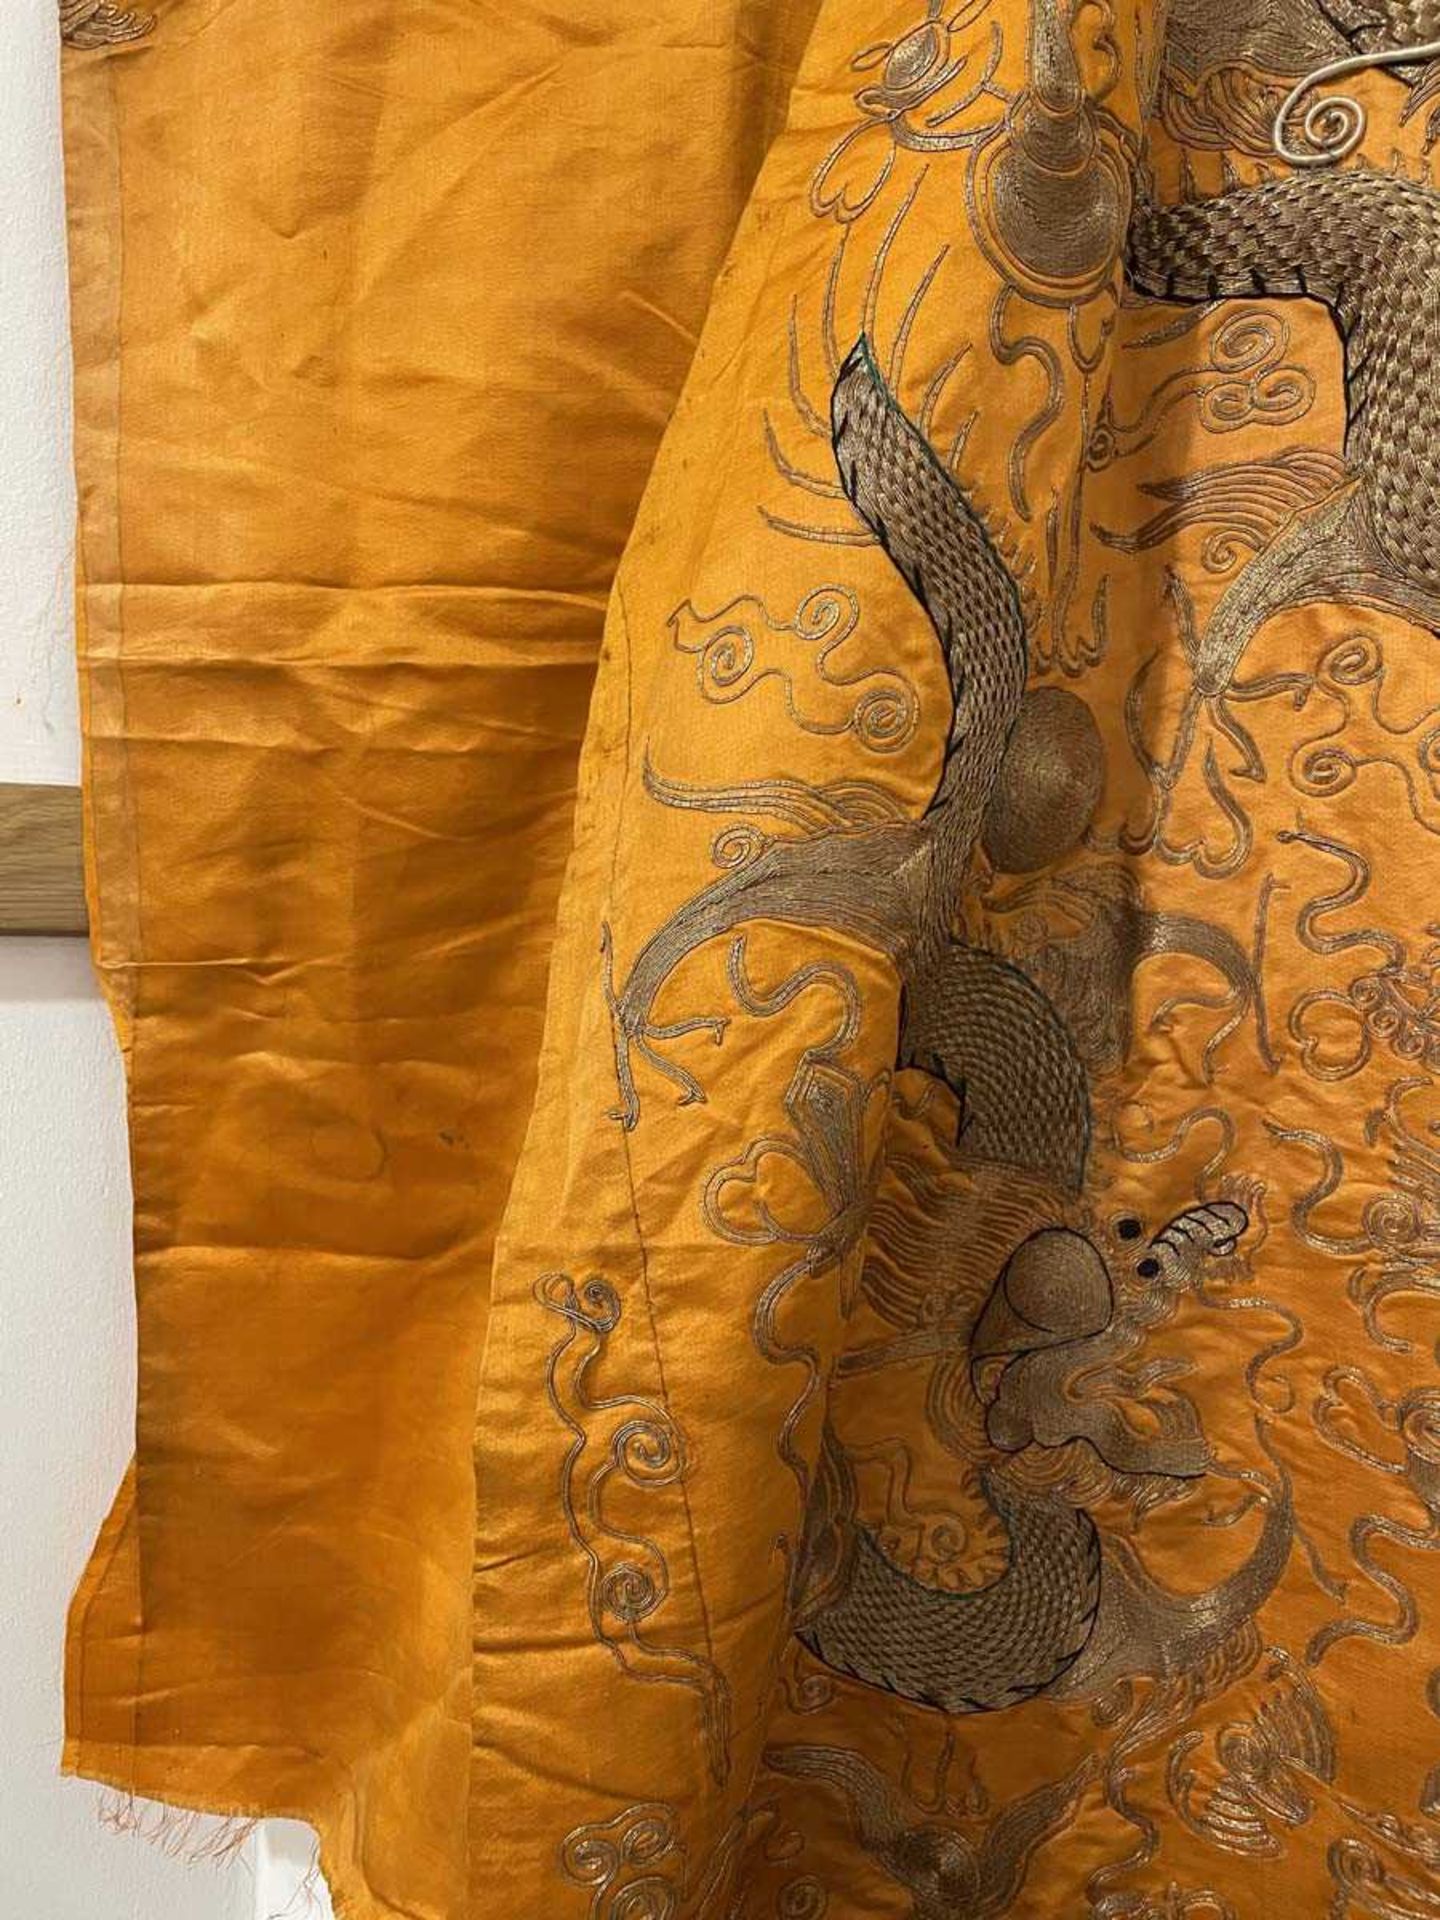 A Chinese robe section worked in gold coloured threads depicting dragons and a pagoda on an orange - Bild 6 aus 15